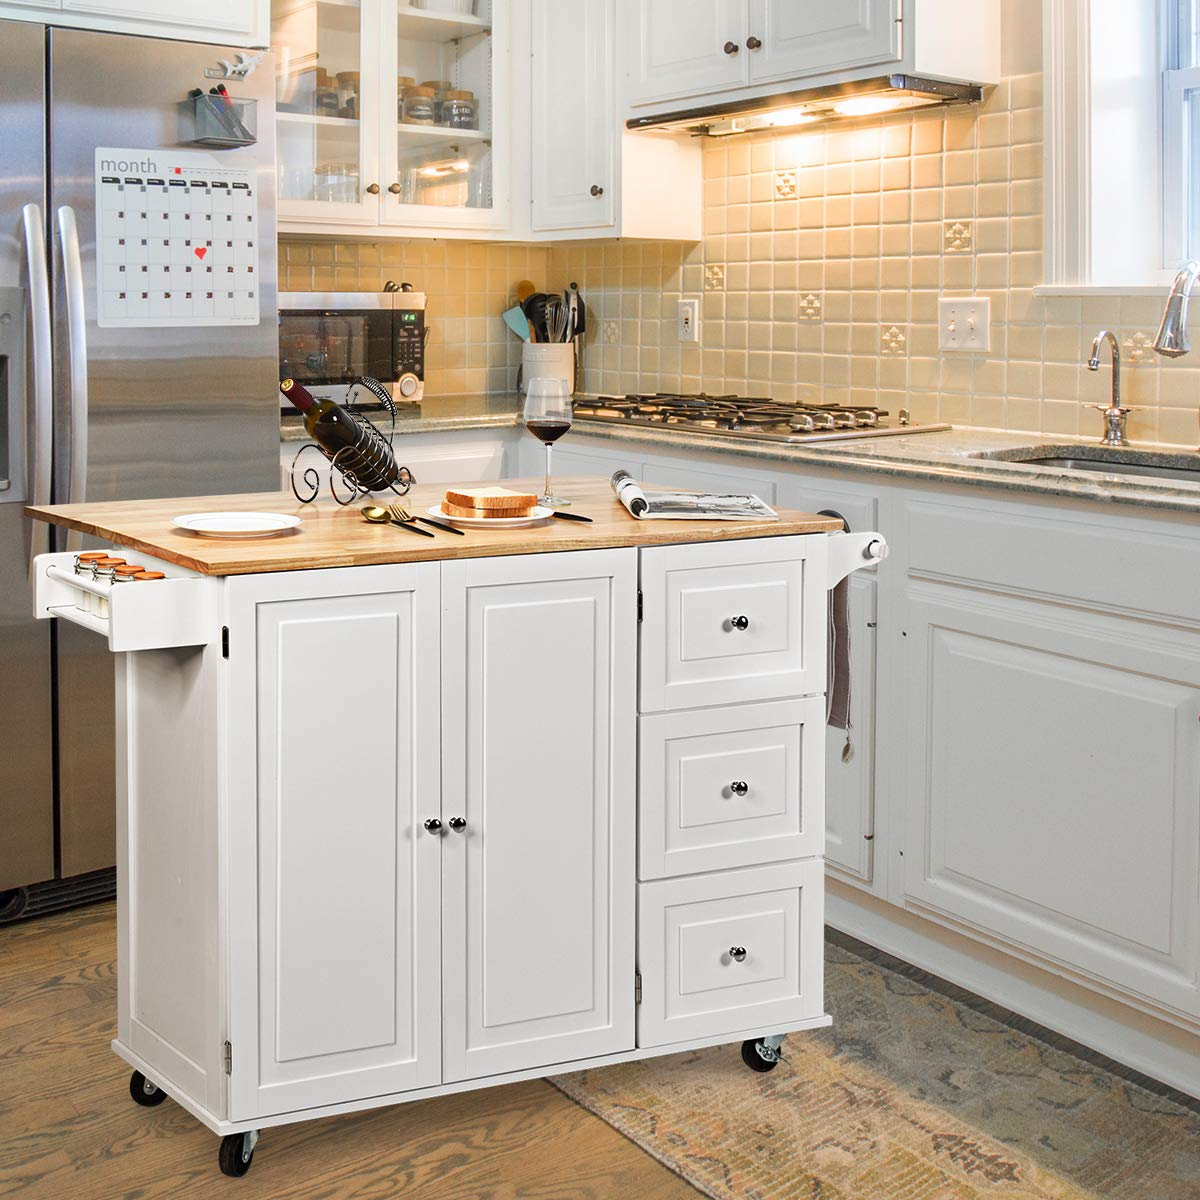 When Will You Need a Kitchen Island Cart?